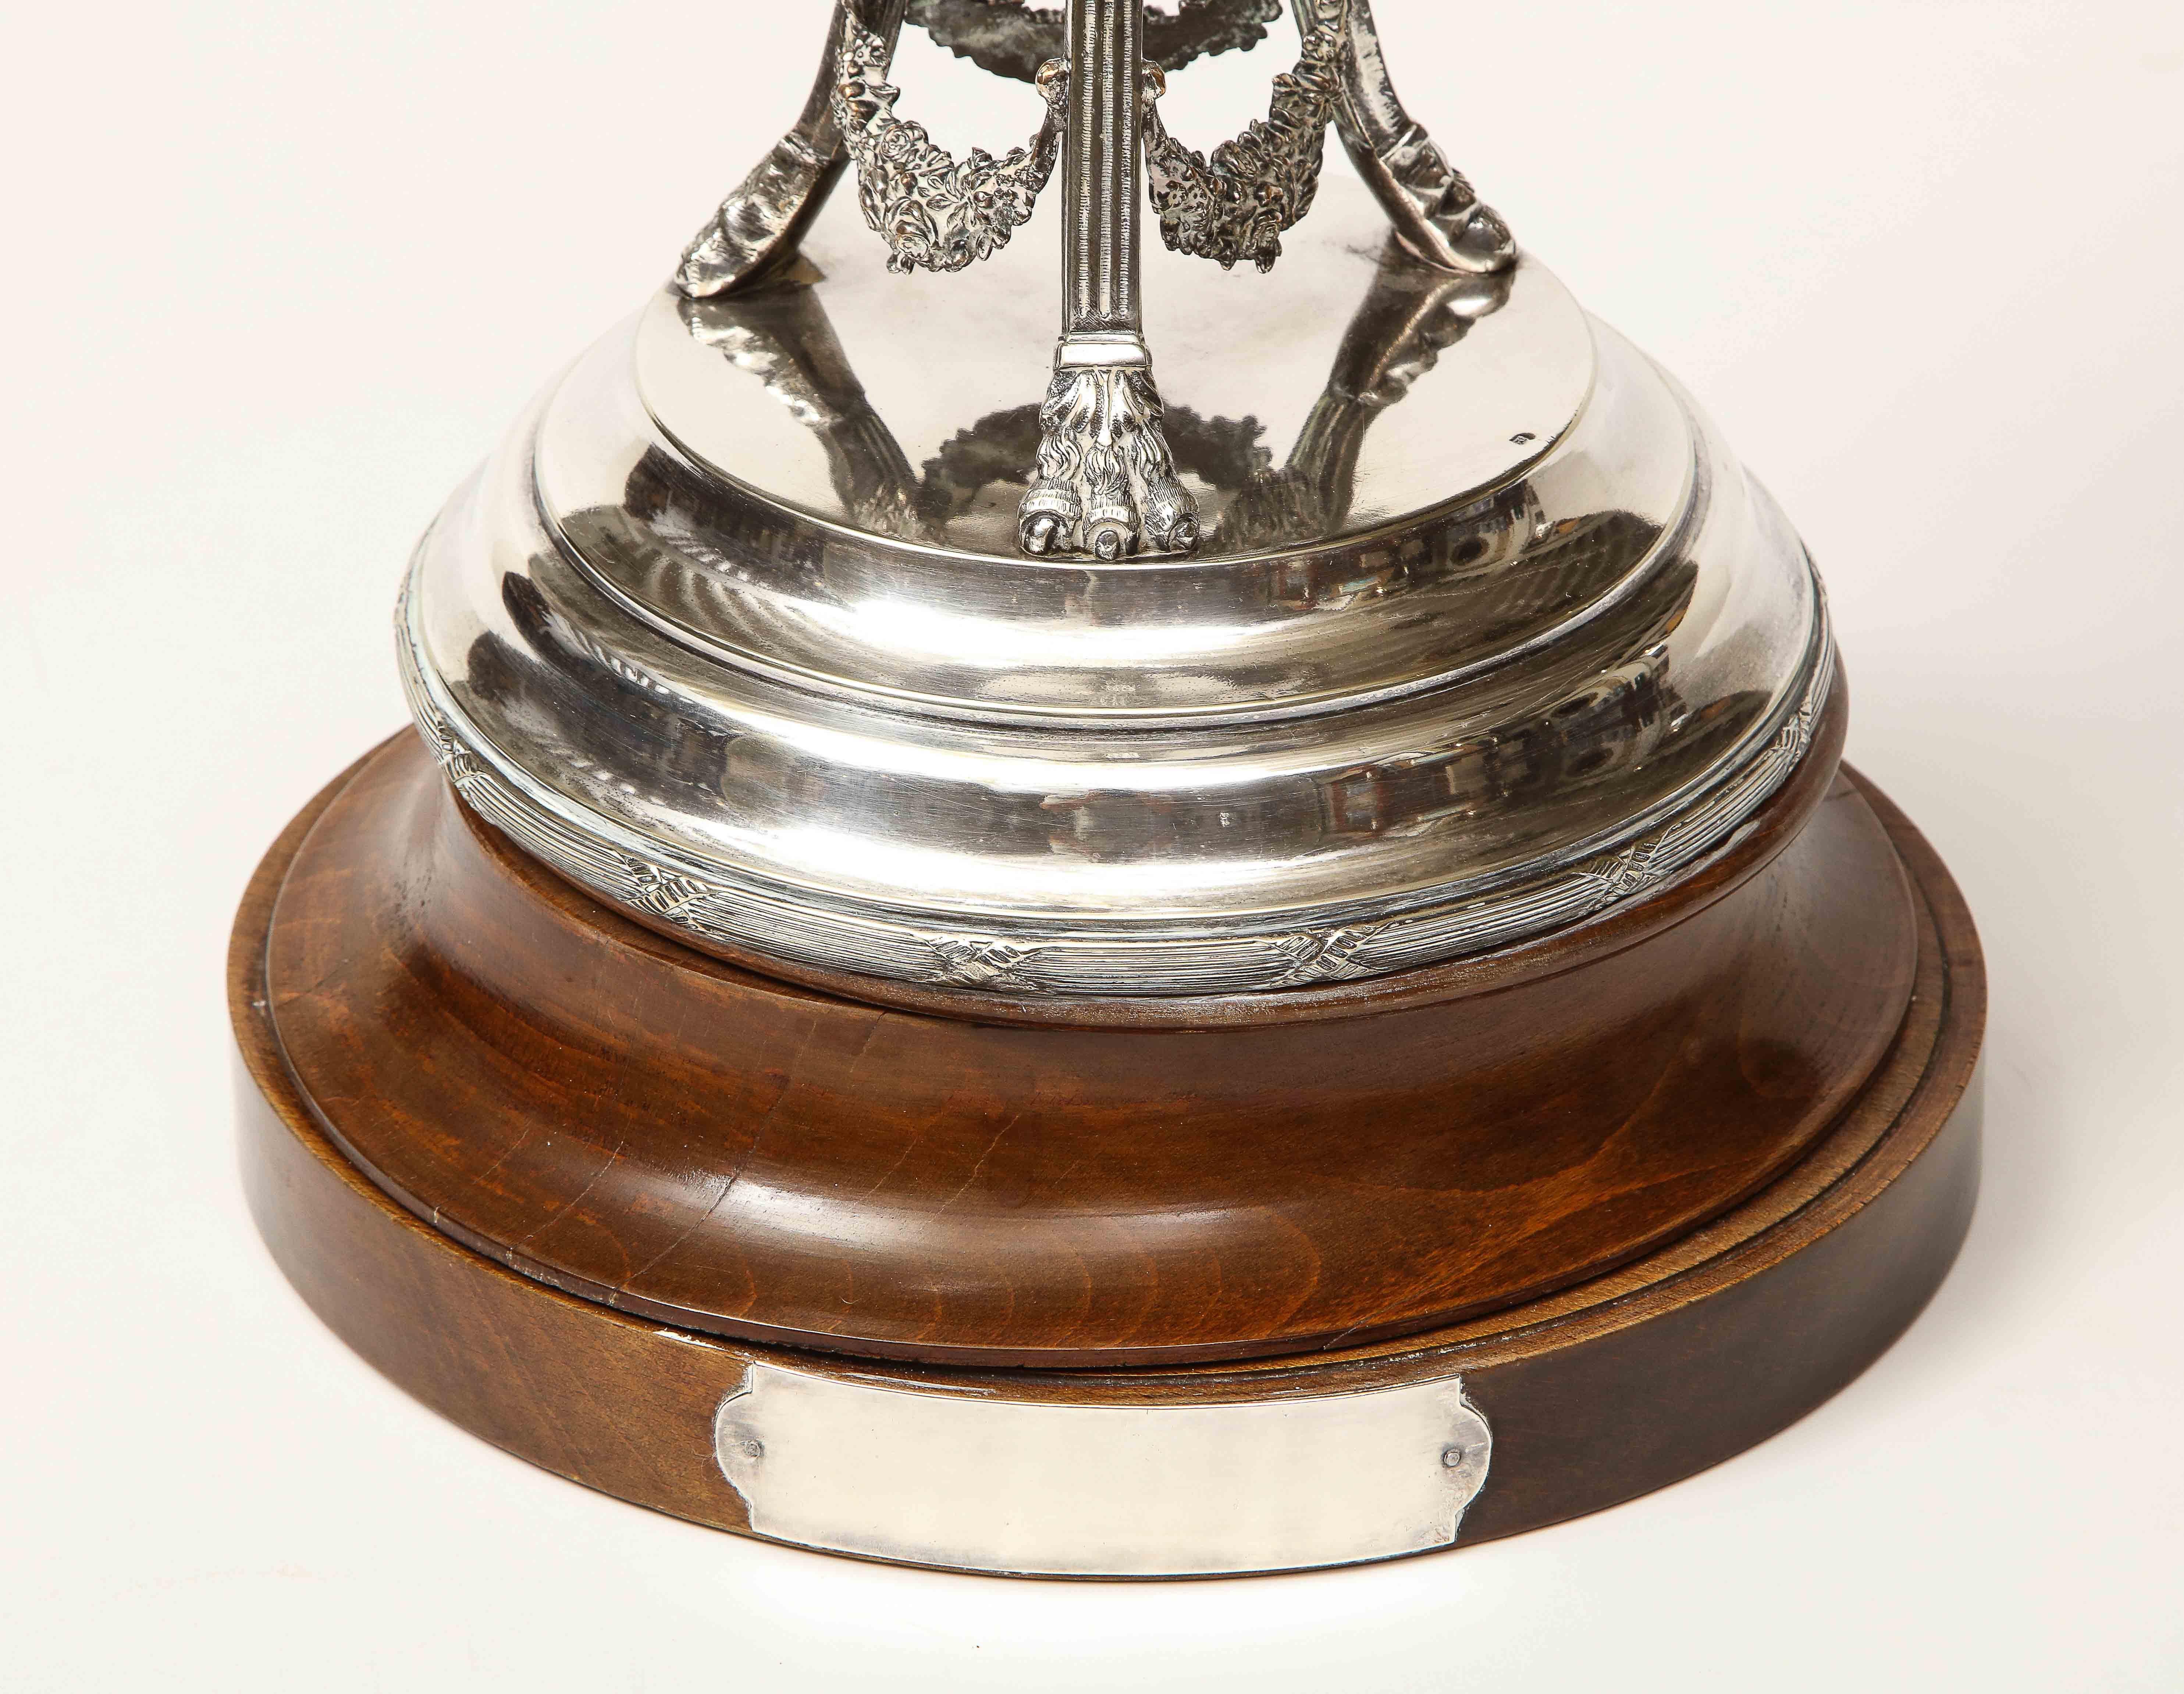 Late 19th century English, silver plated trophy on stand.